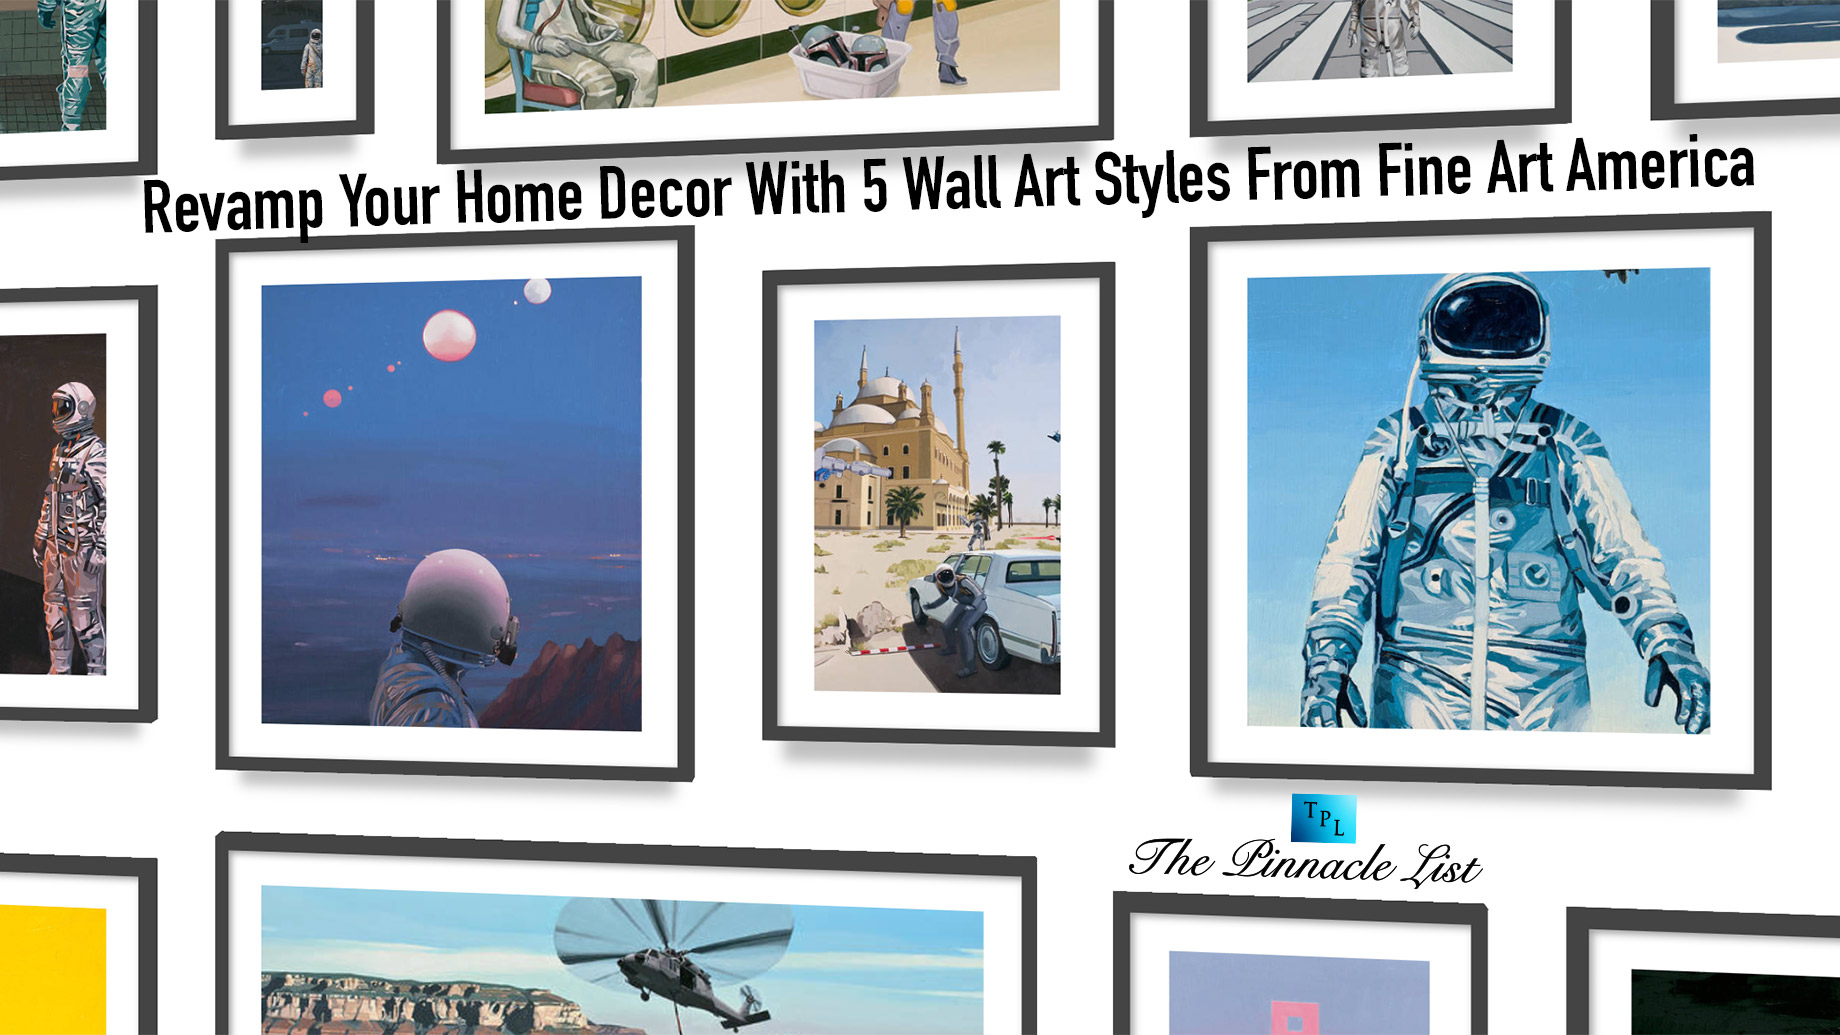 Revamp Your Home Decor With 5 Wall Art Styles From Fine Art America